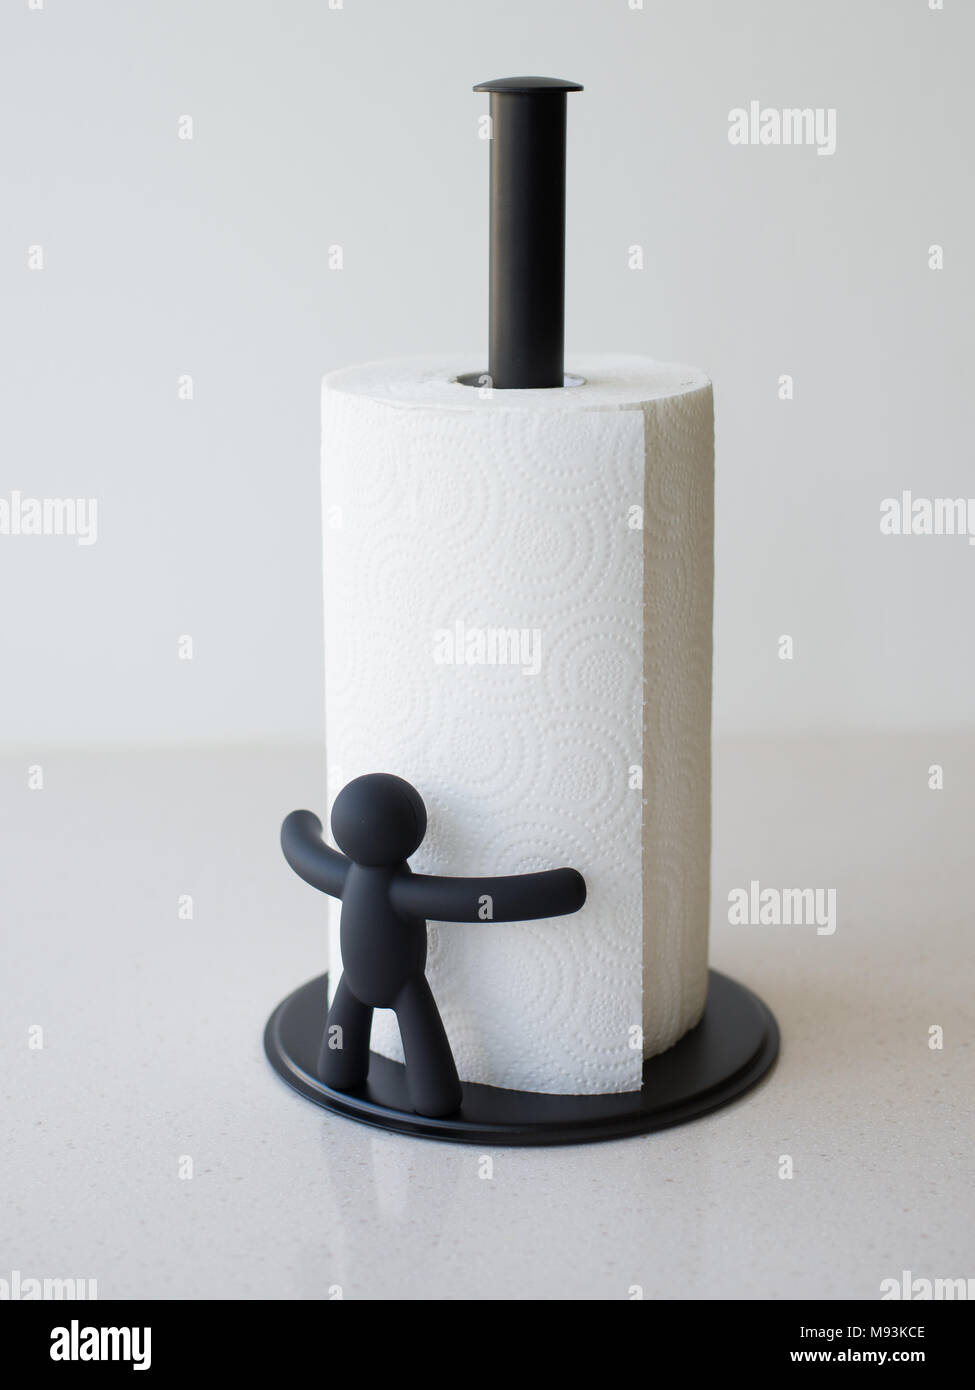 https://c8.alamy.com/comp/M93KCE/stand-under-the-towel-white-paper-towel-M93KCE.jpg